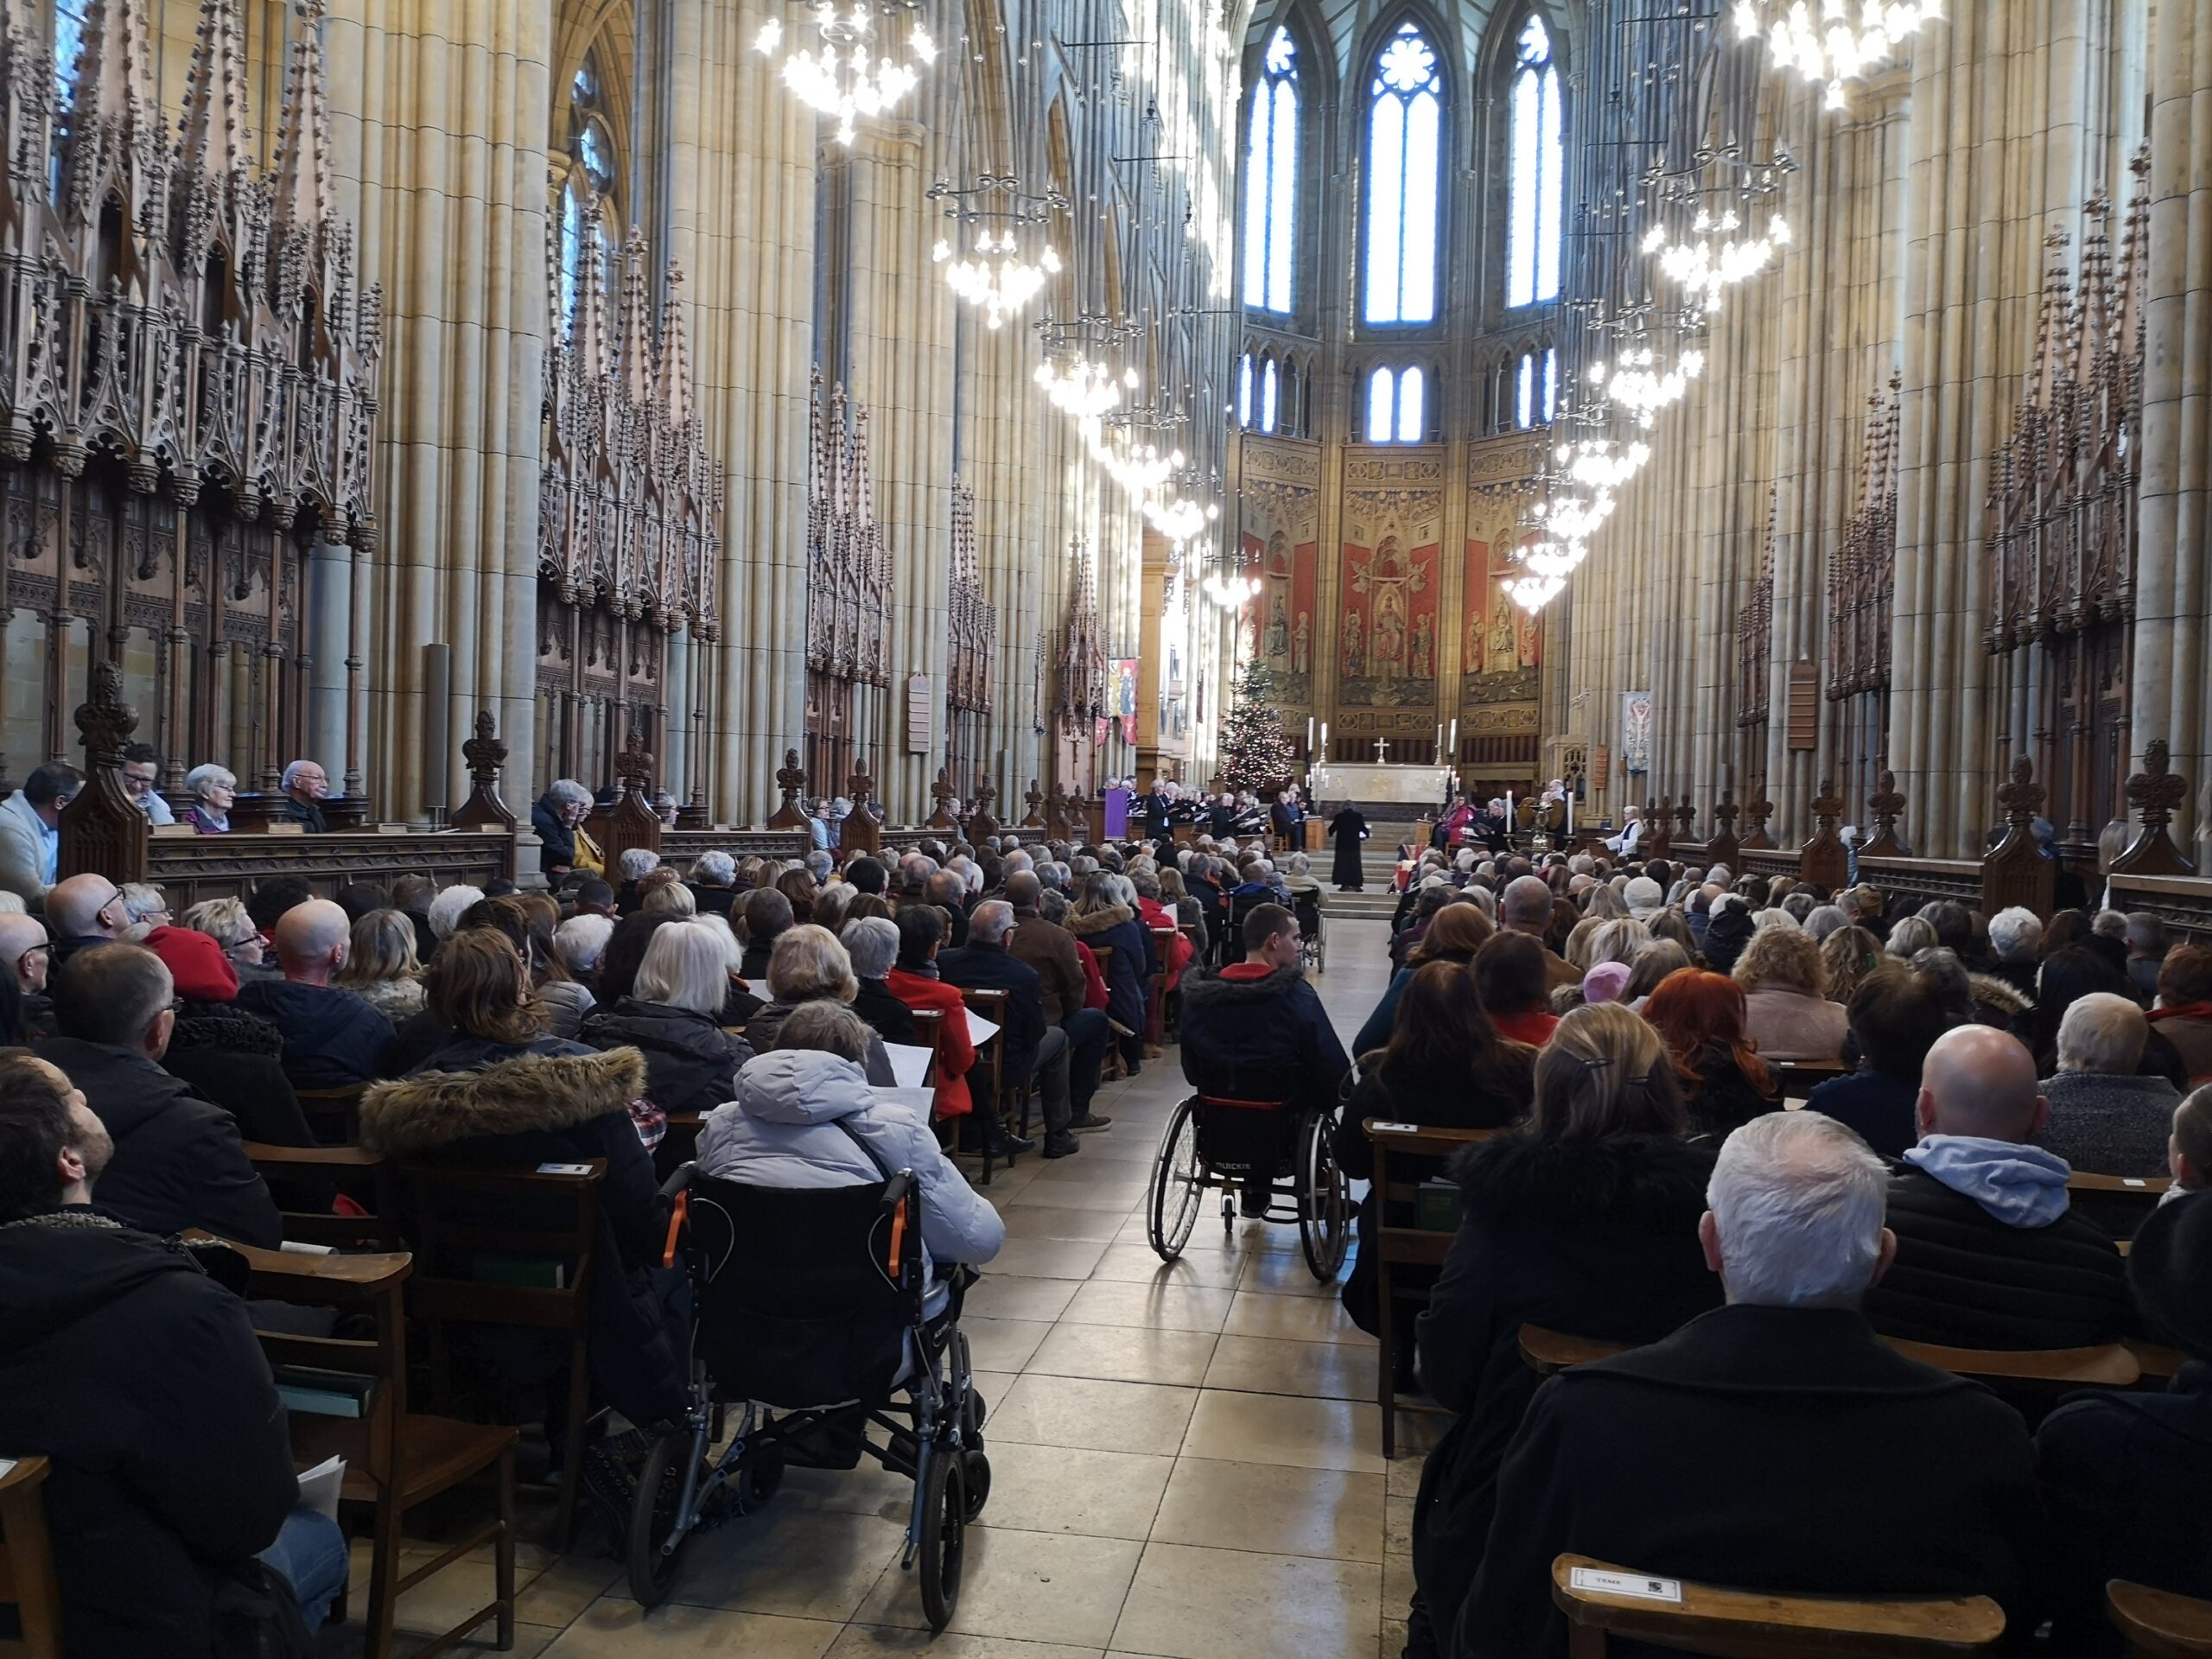 Care for Veterans Christmas Carol Concert at the Lancing College Chapel